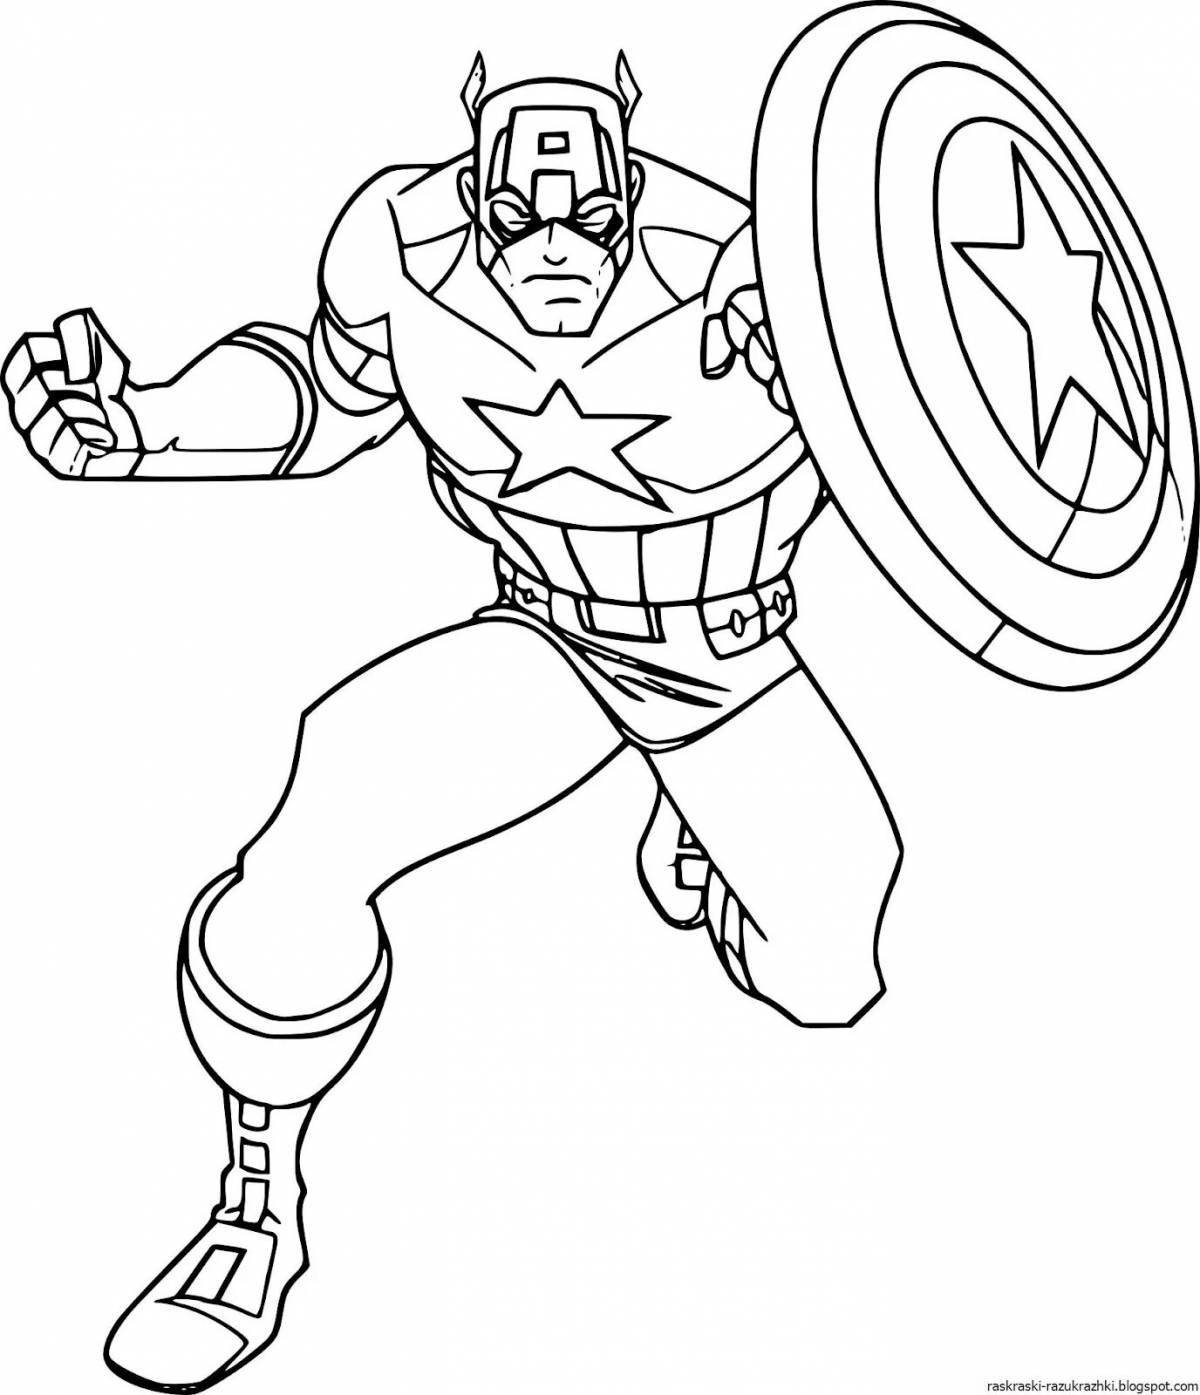 Great marvel coloring book for boys